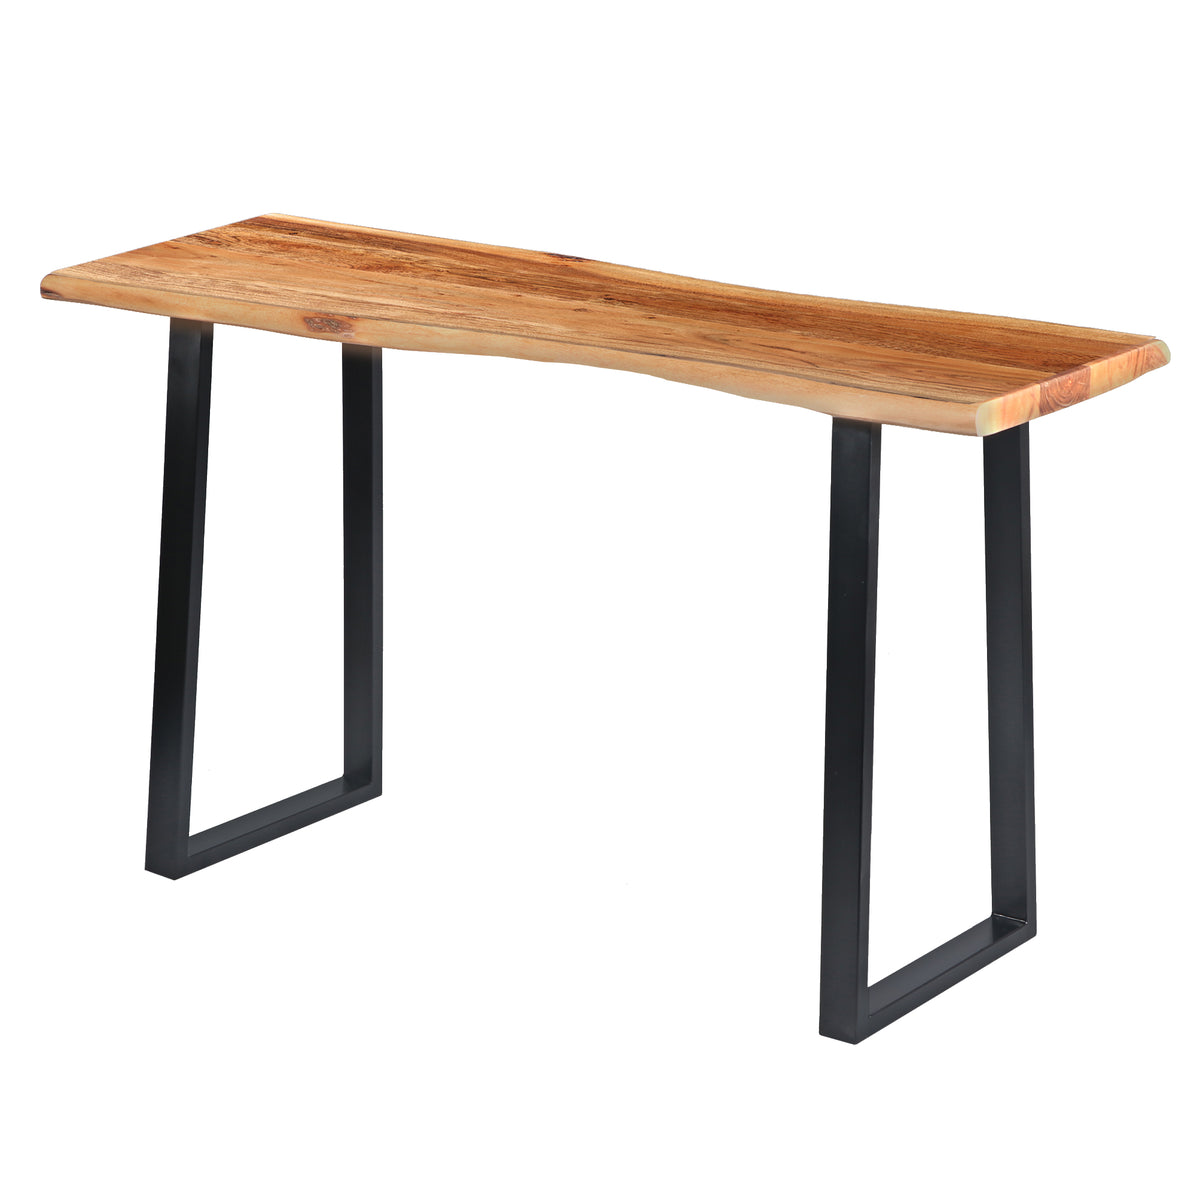 Industrial Wooden Live Edge Desk with Metal Sled Leg Support, Brown and Black ,By The Urban Port - UPT-195122